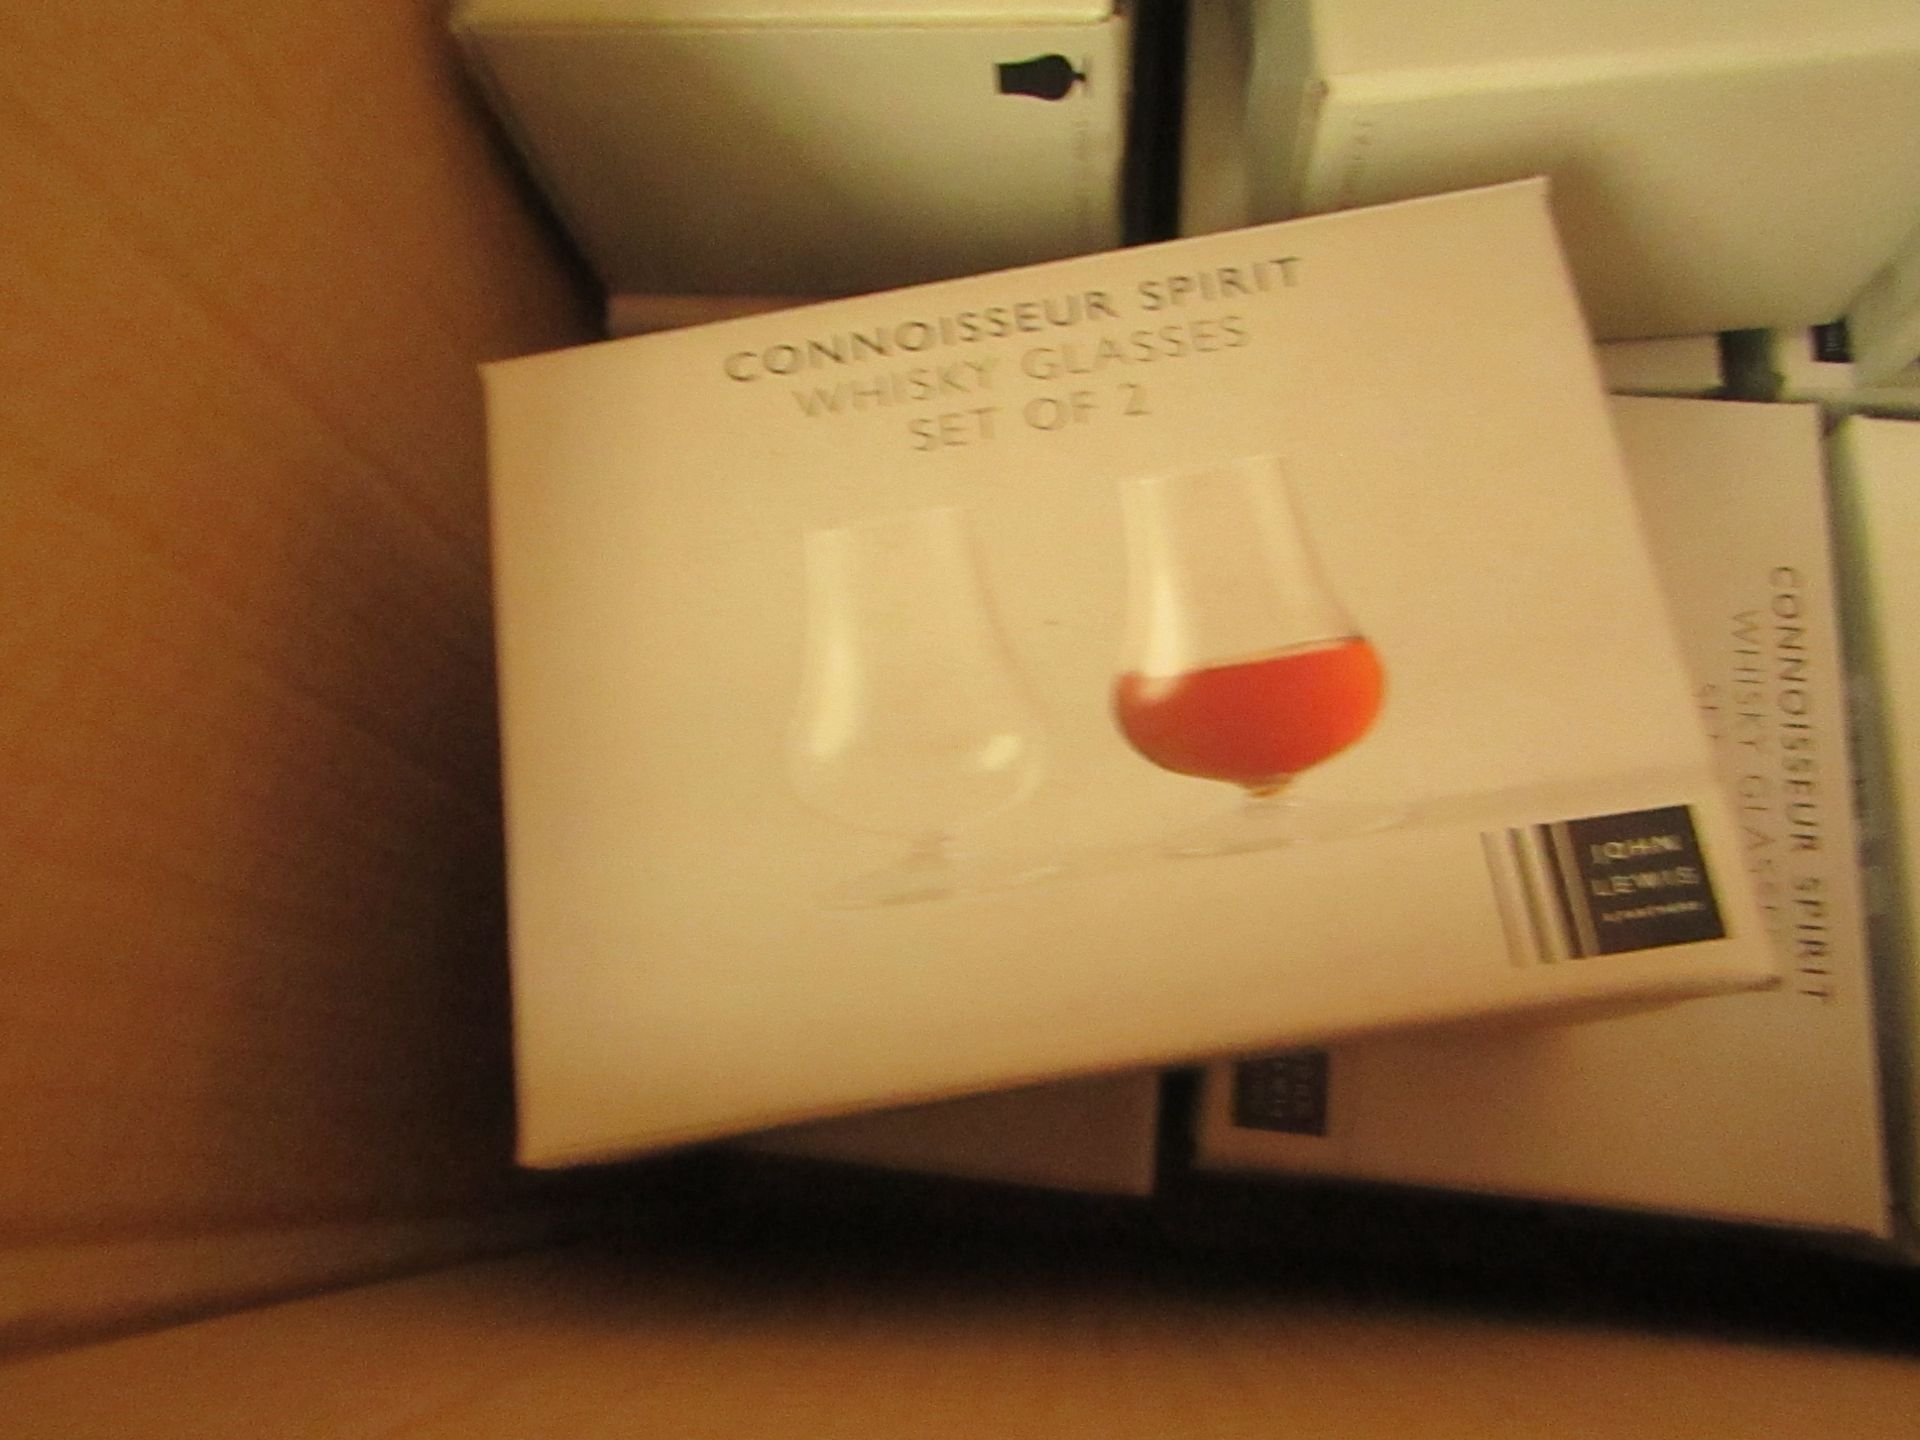 Box of 2 John Lewis Connoisseur Whiskey glasses. New & Boxed